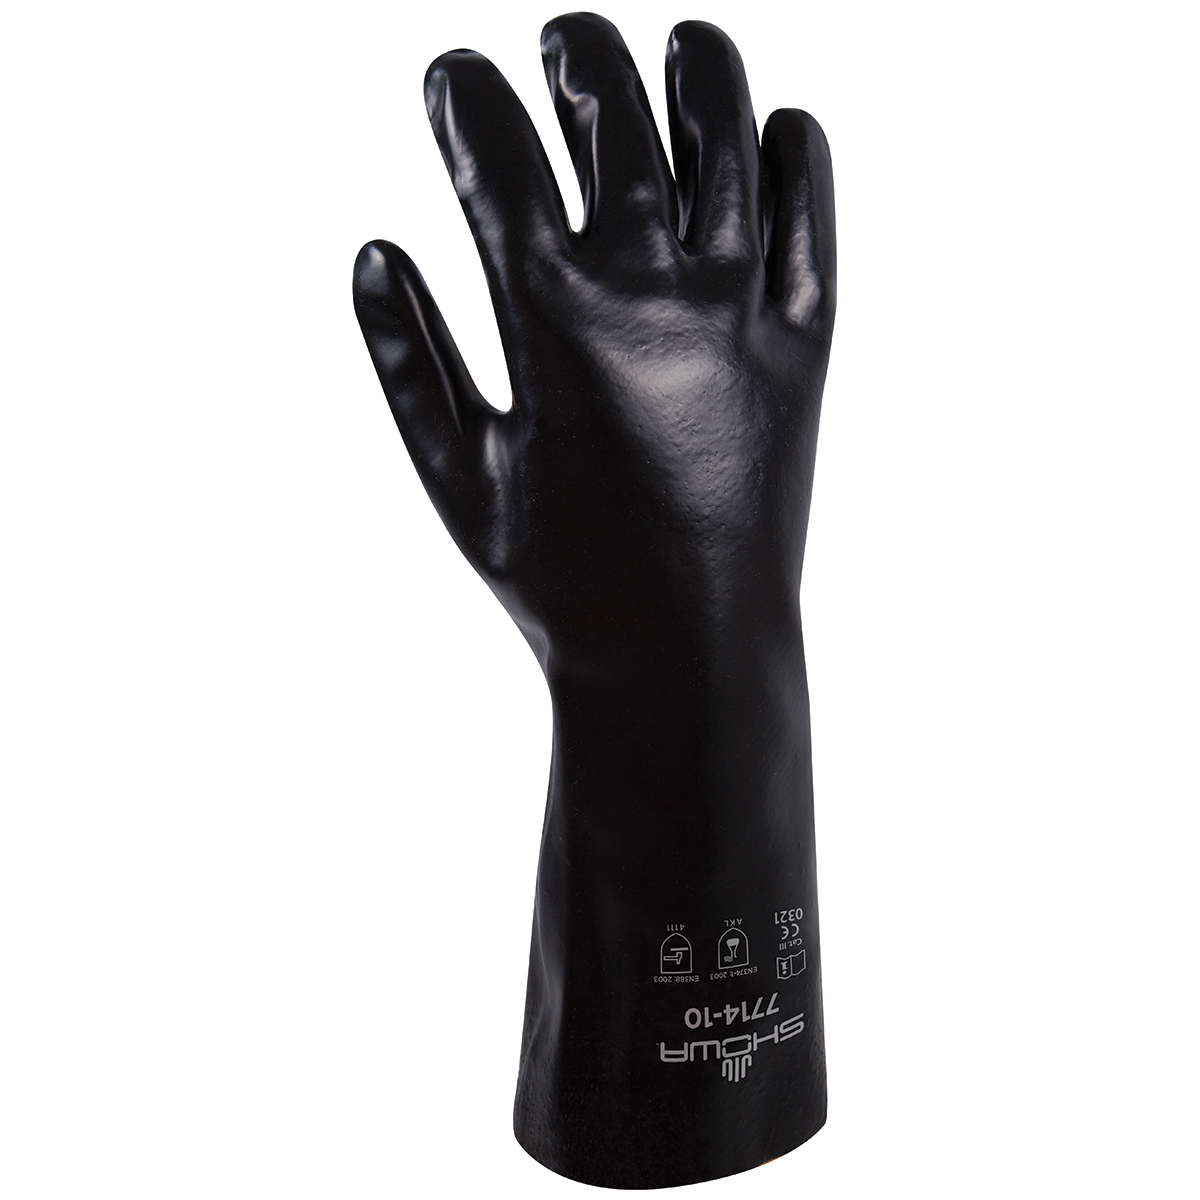 SHOWA® Size 10 Black Cotton Lined PVC Chemical Resistant Gloves